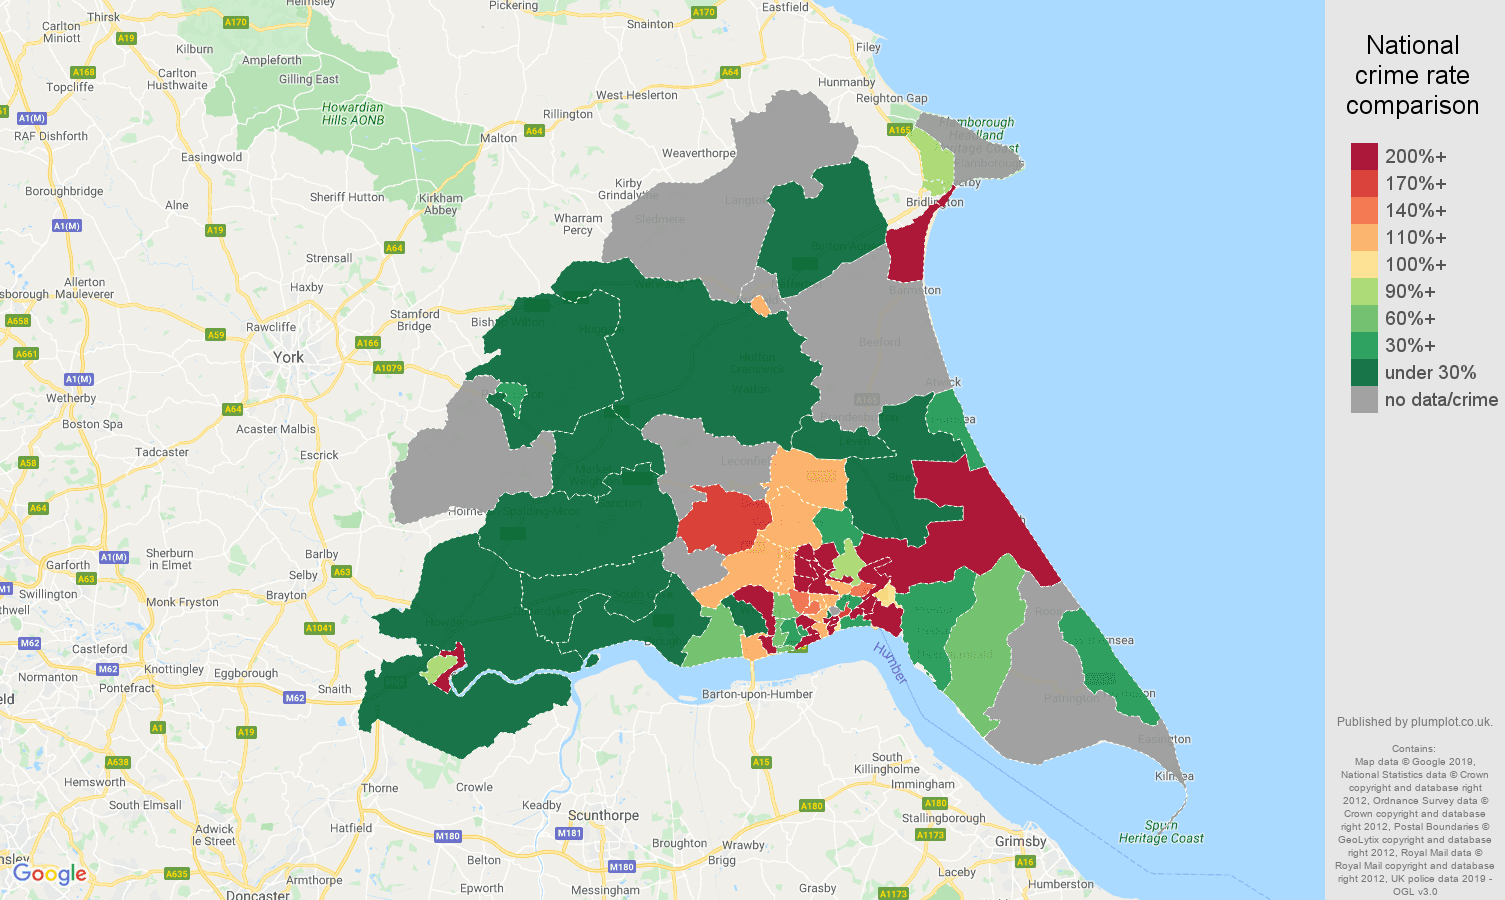 East Riding of Yorkshire shoplifting crime rate comparison map